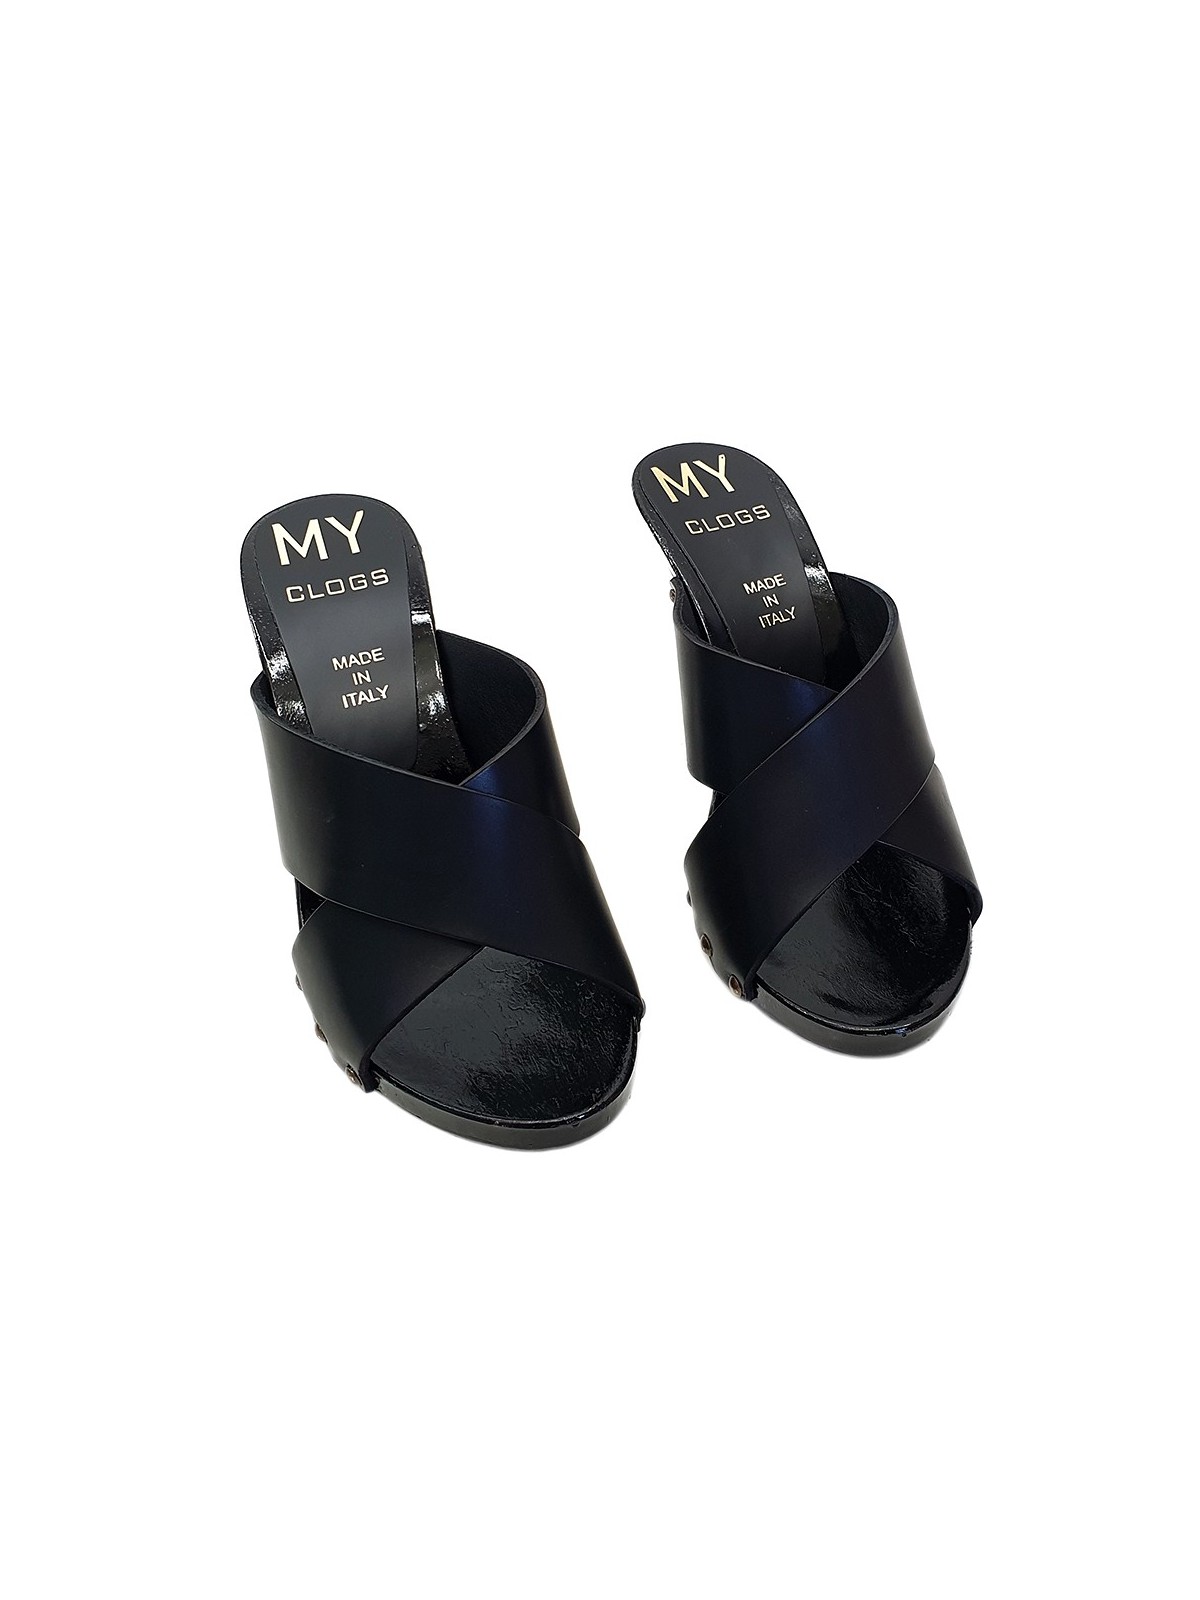 BLACK LEATHER CLOGS WITH HEEL 9 CM